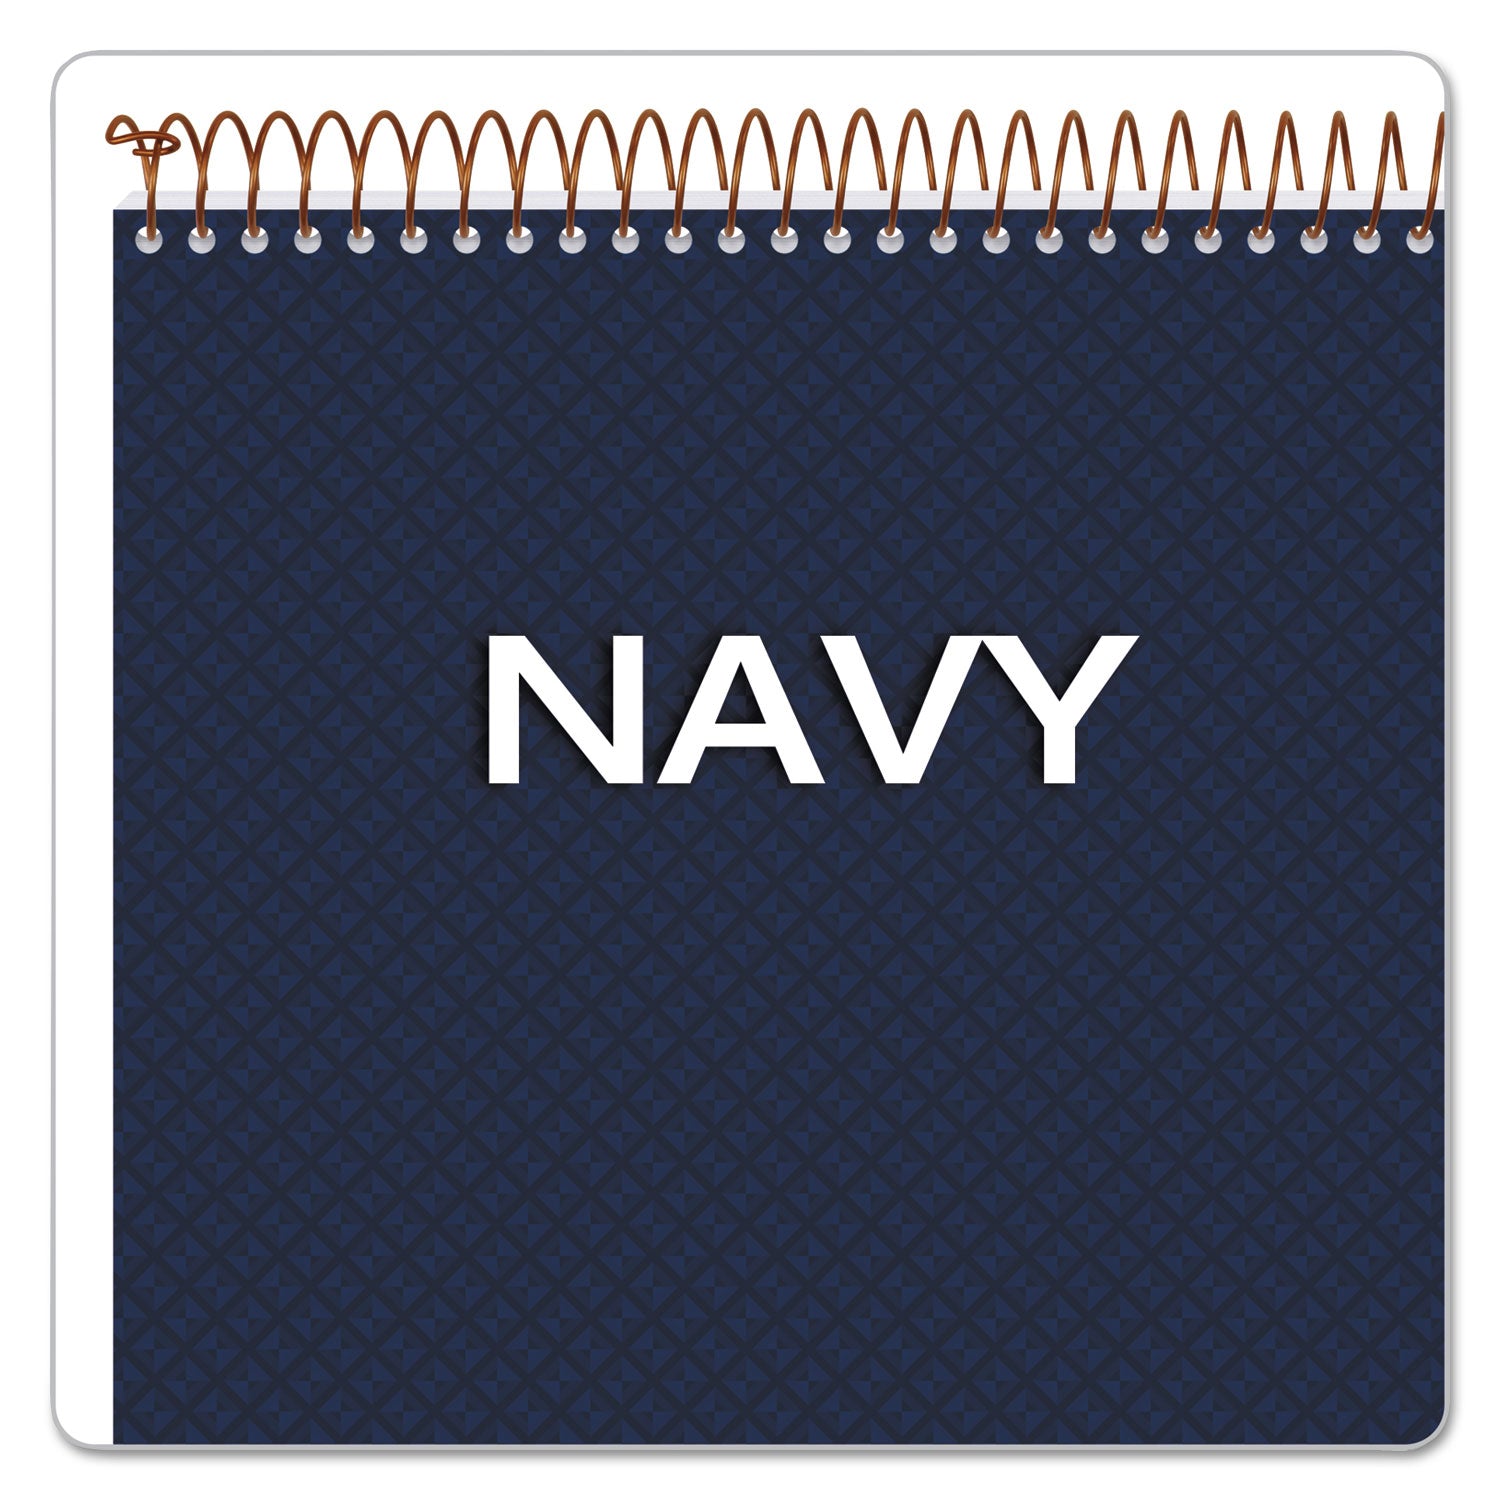 Gold Fibre Wirebound Project Notes Pad, Project-Management Format, Navy Cover, 70 White 8.5 x 11.75 Sheets - 